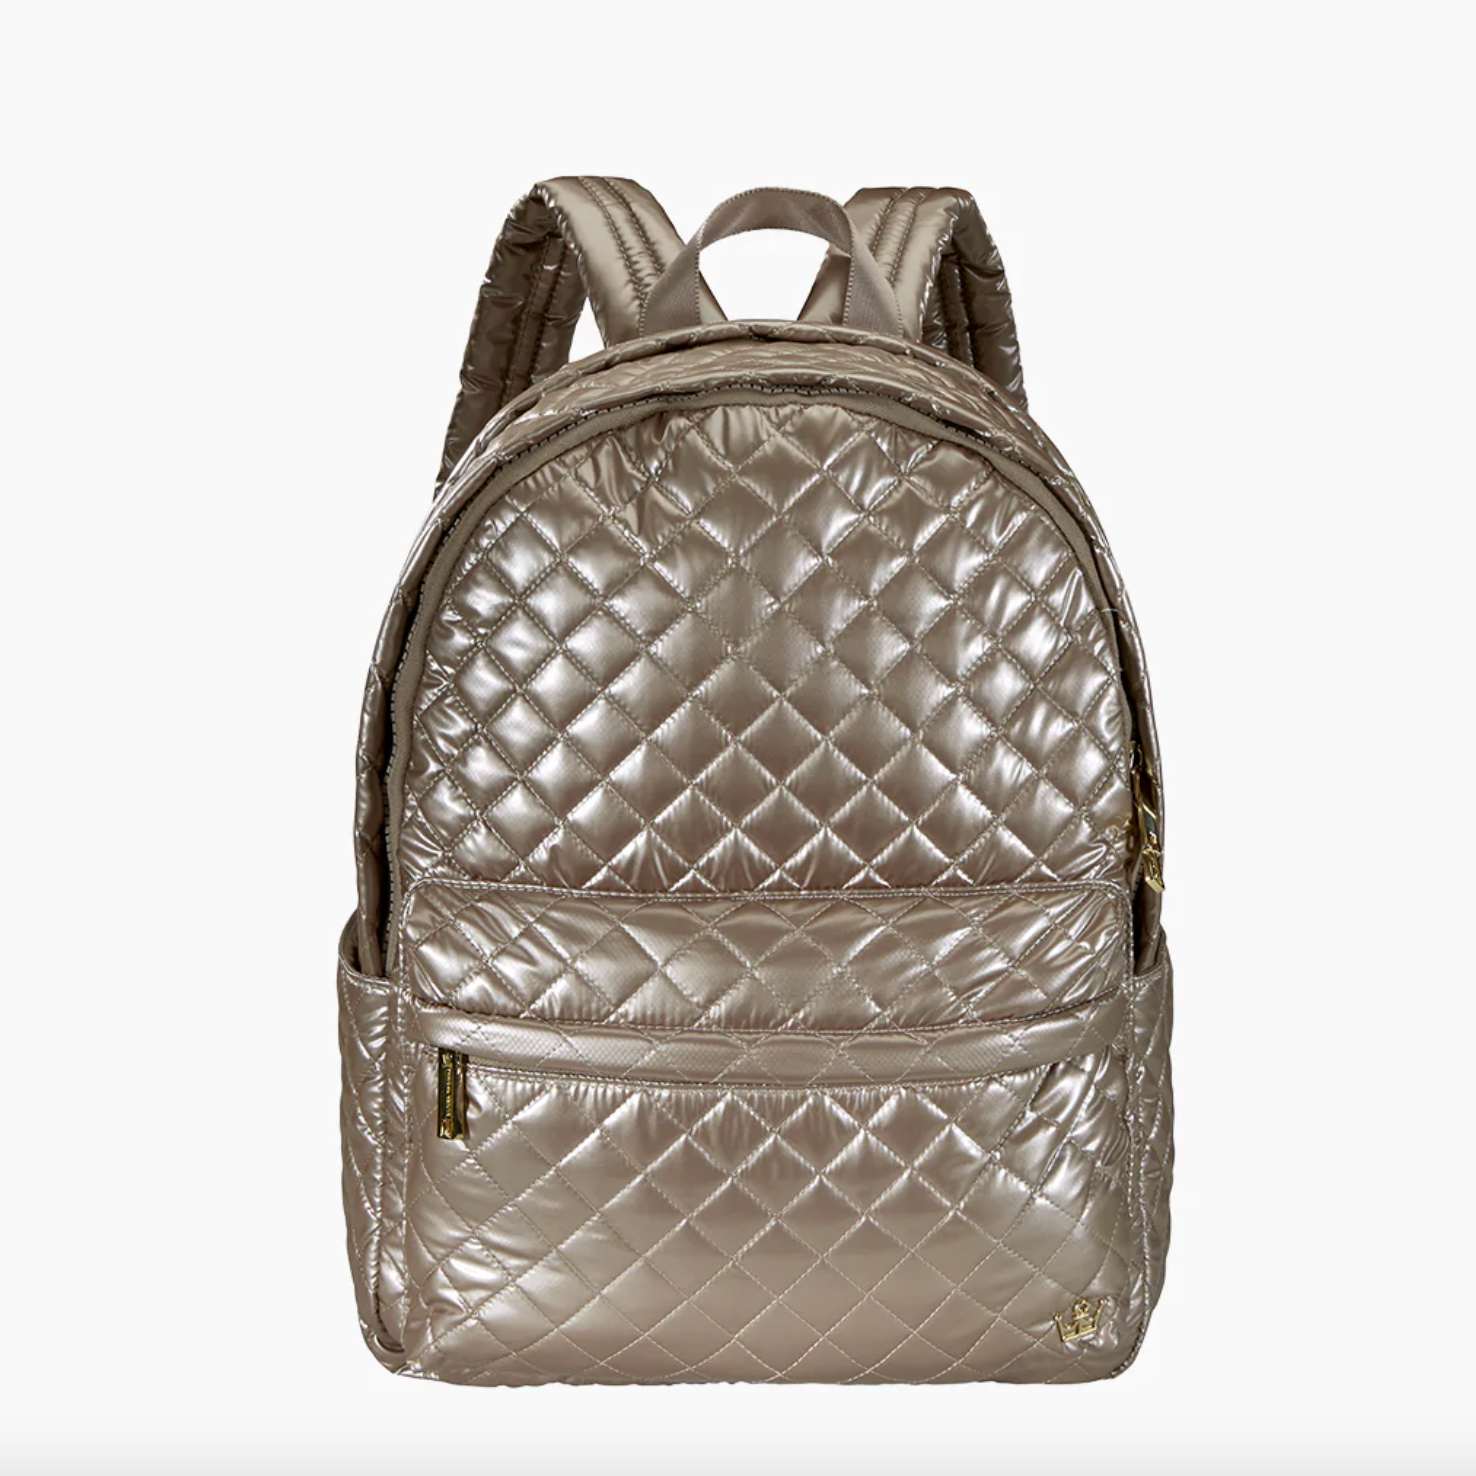 Oliver Thomas Wingwoman Laptop Backpack Backpacks in Rose Gold at Wrapsody